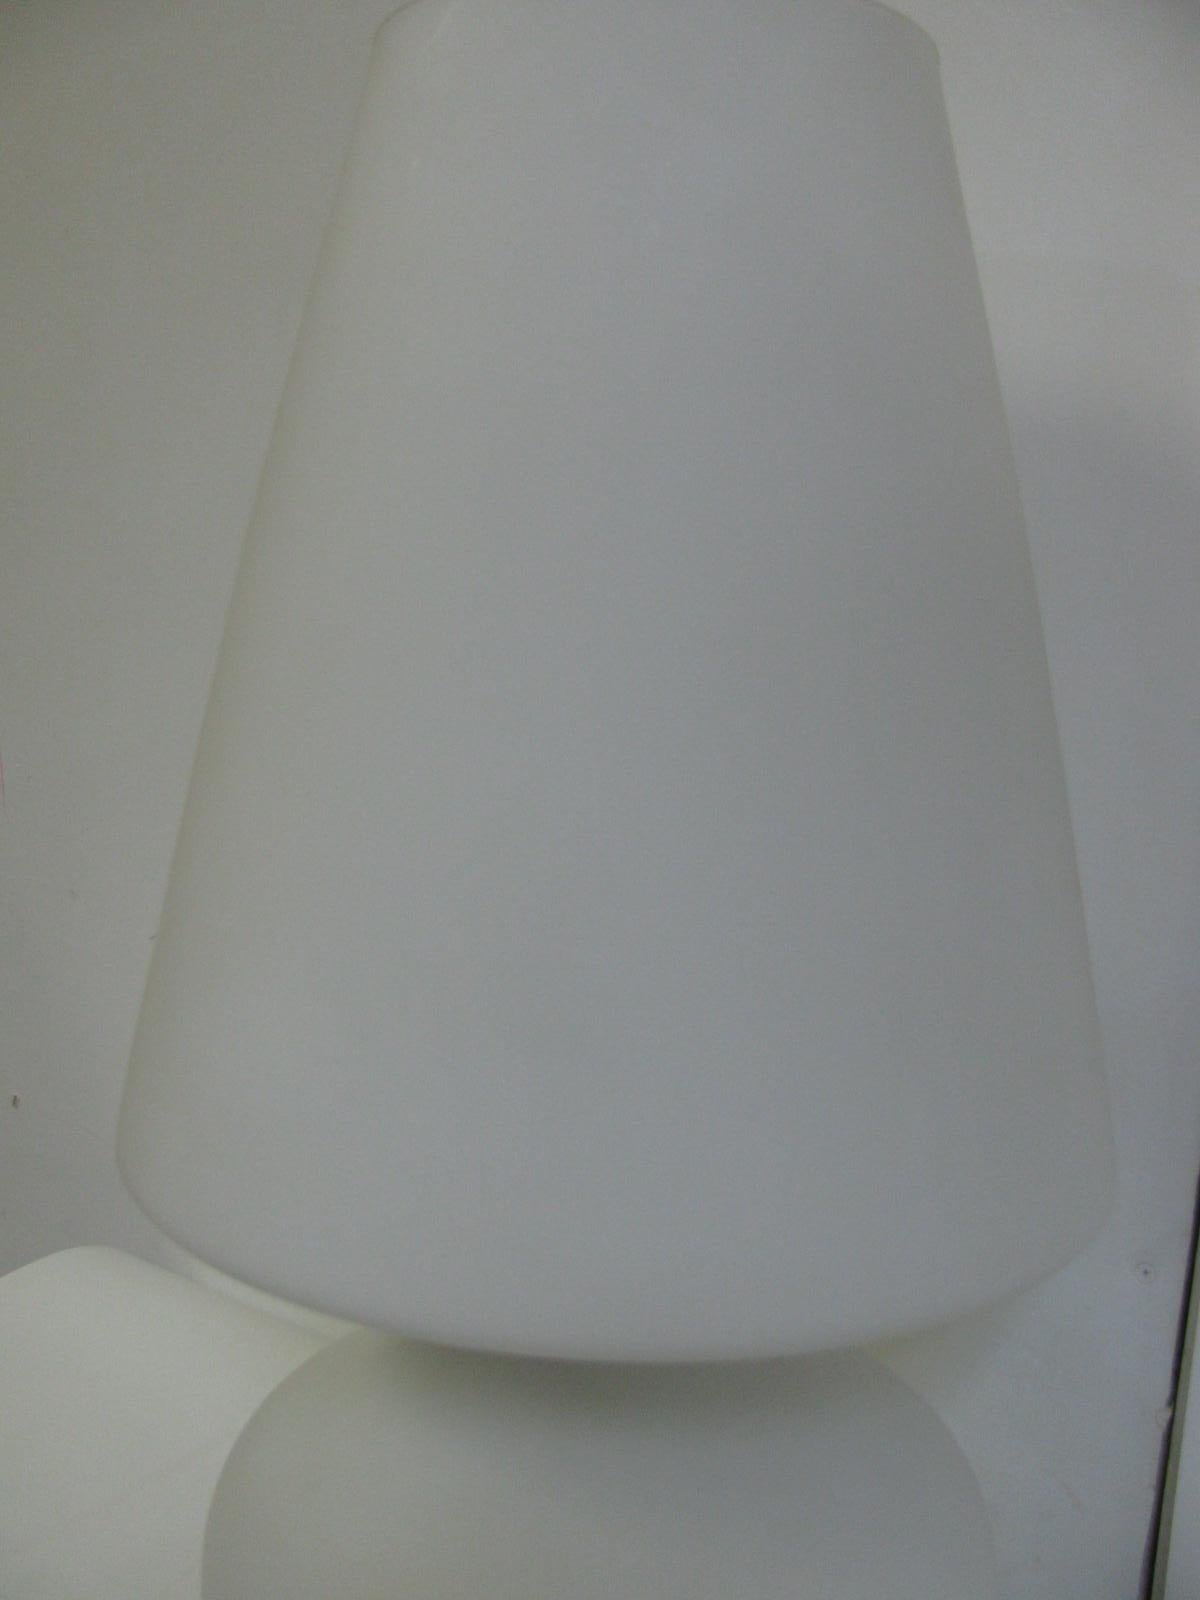 Laurel Mid-Century Modern Murano Mushroom One Piece Lamp & Shade In Good Condition For Sale In Port Jervis, NY